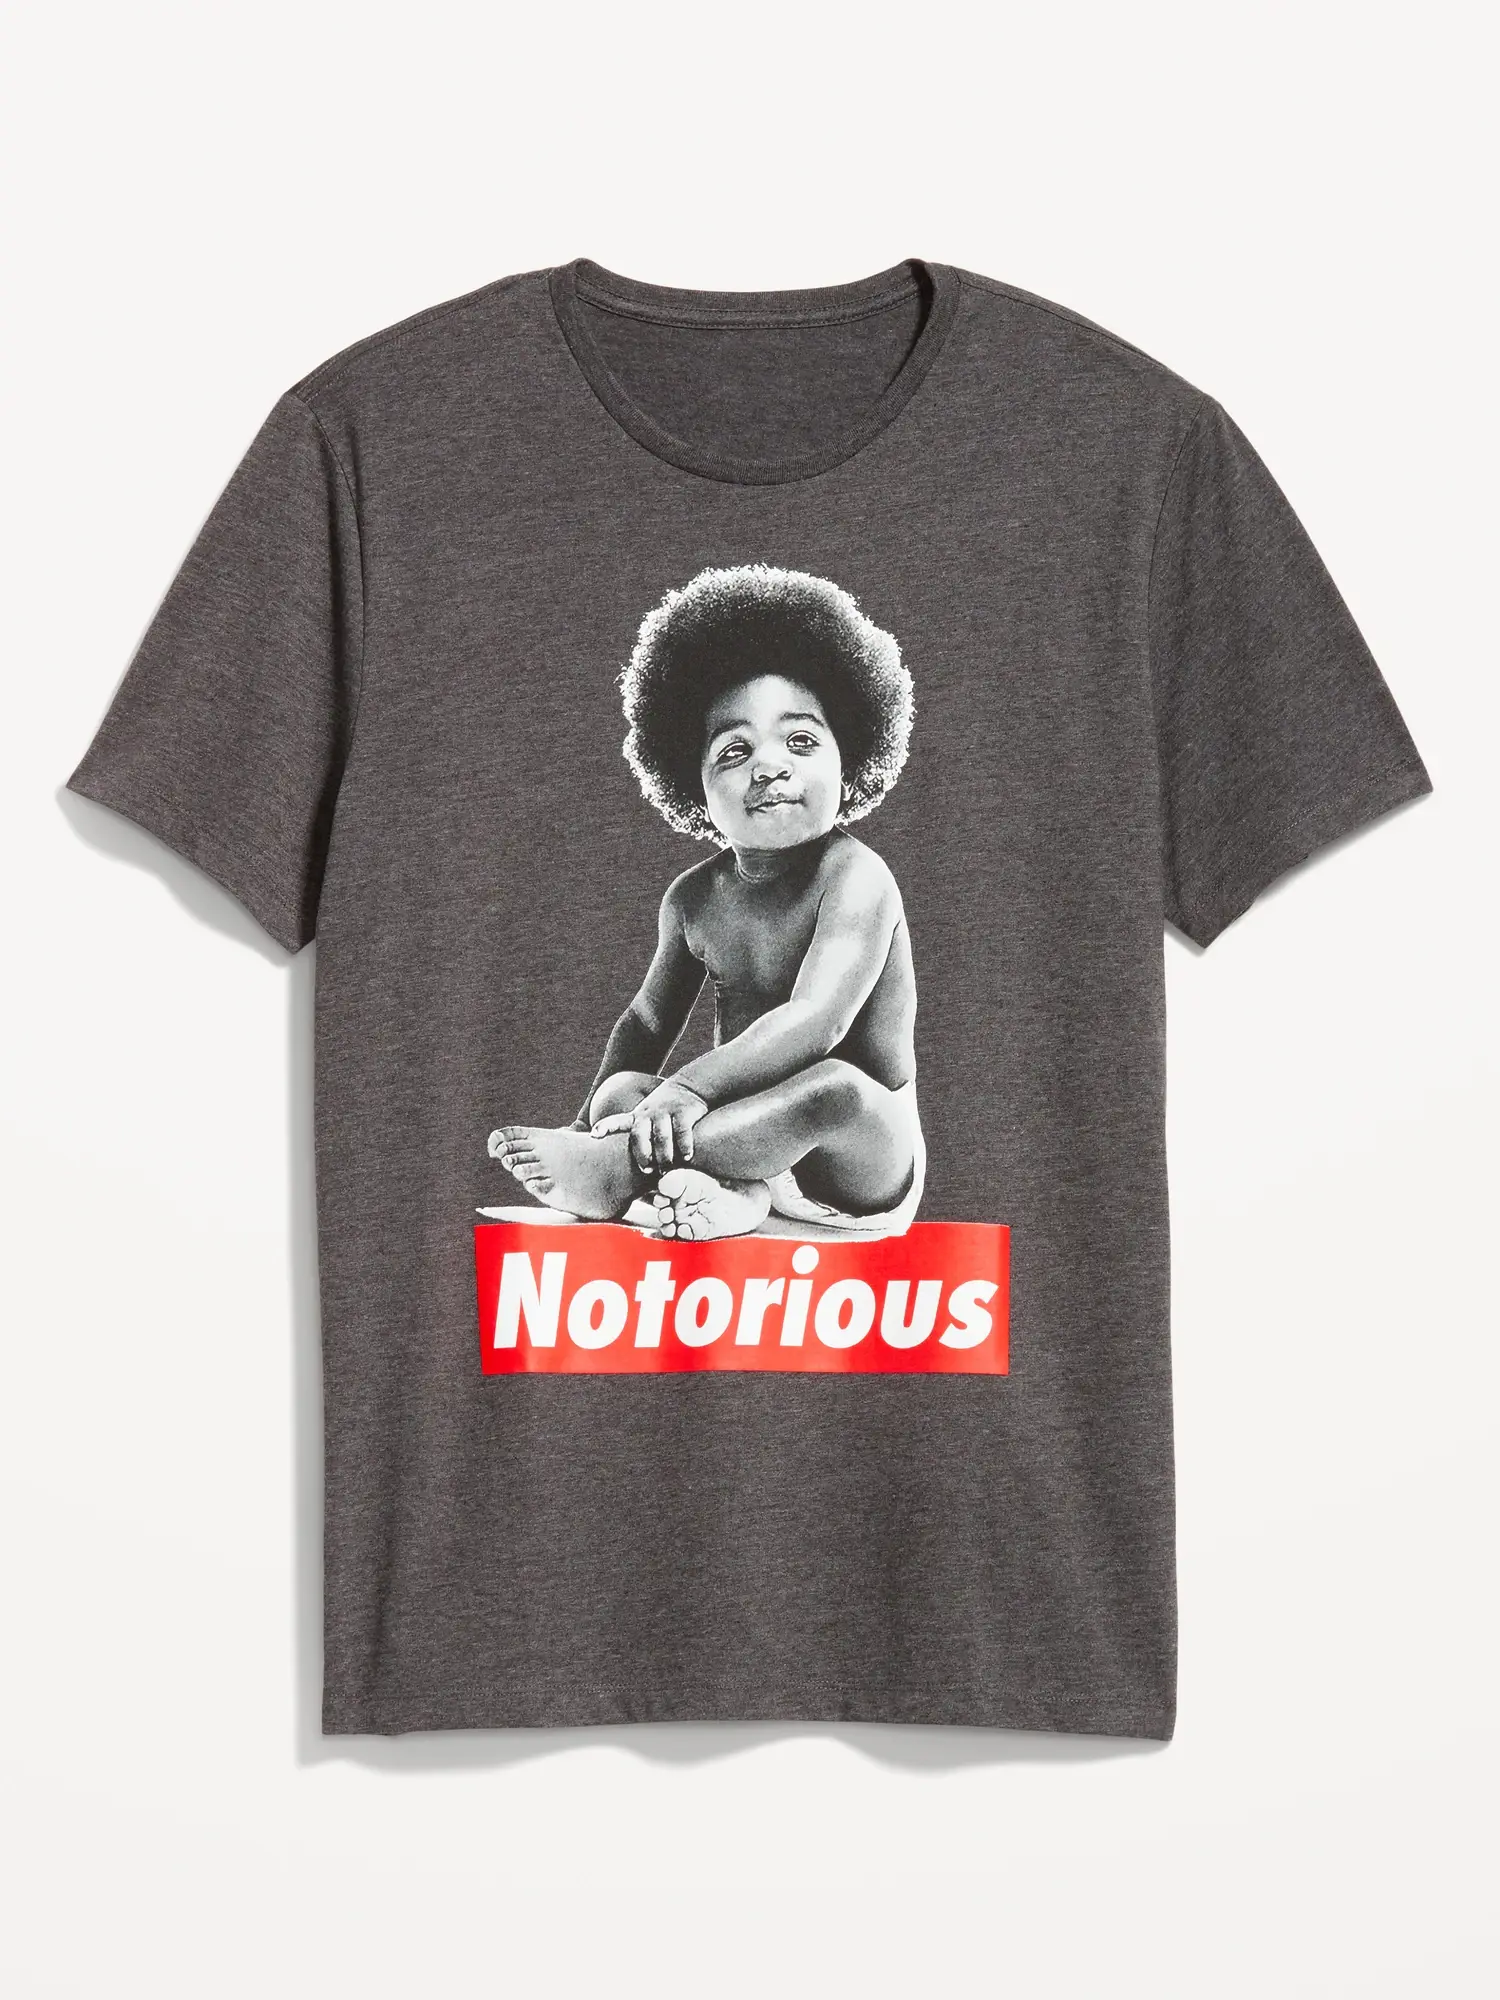 Old Navy Notorious B.I.G. Biggie Smalls™ Gender-Neutral T-Shirt for Adults gray. 1